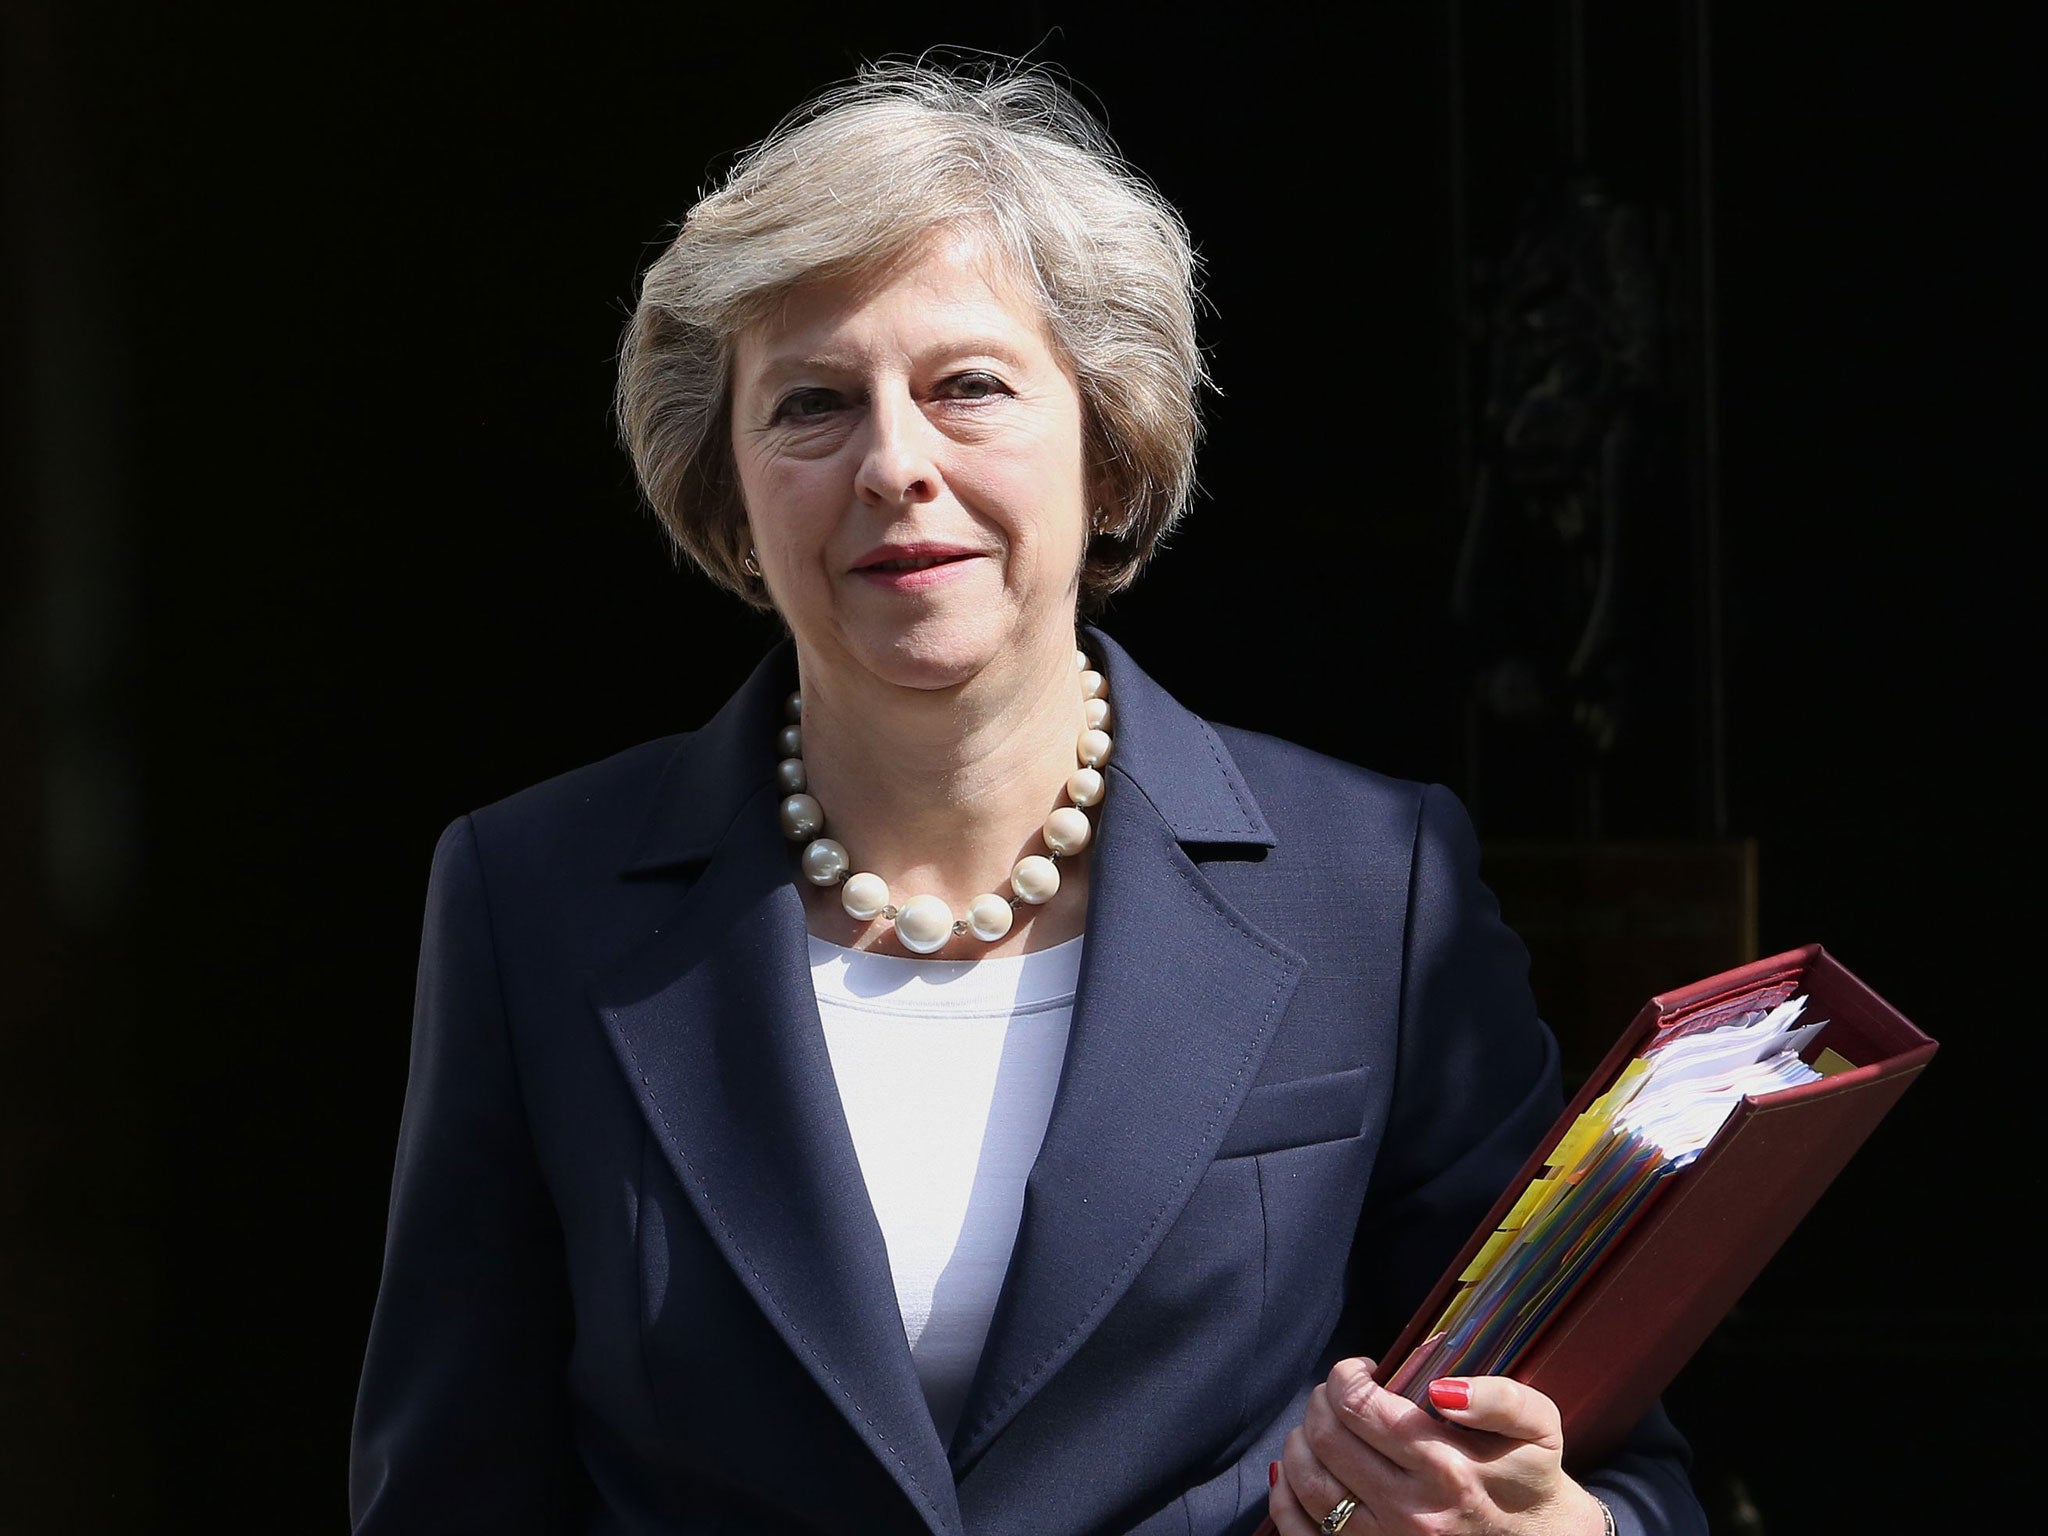 Theresa May has summoned ministers to Chequers to discuss Brexit